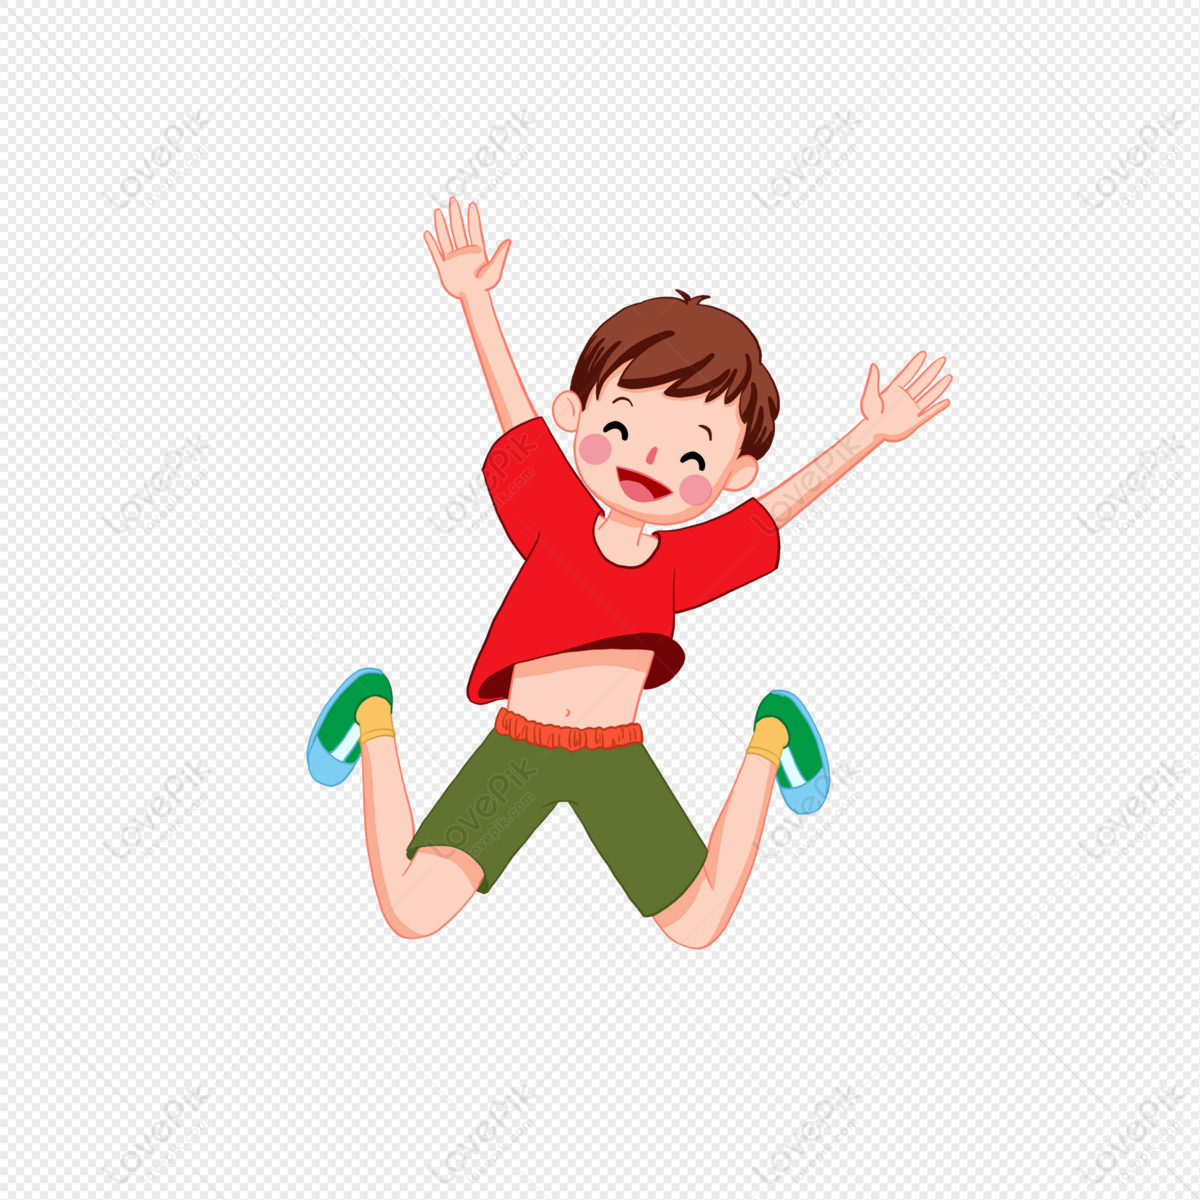 Jumping Kids PNG Transparent And Clipart Image For Free Download - Lovepik  | 401559116